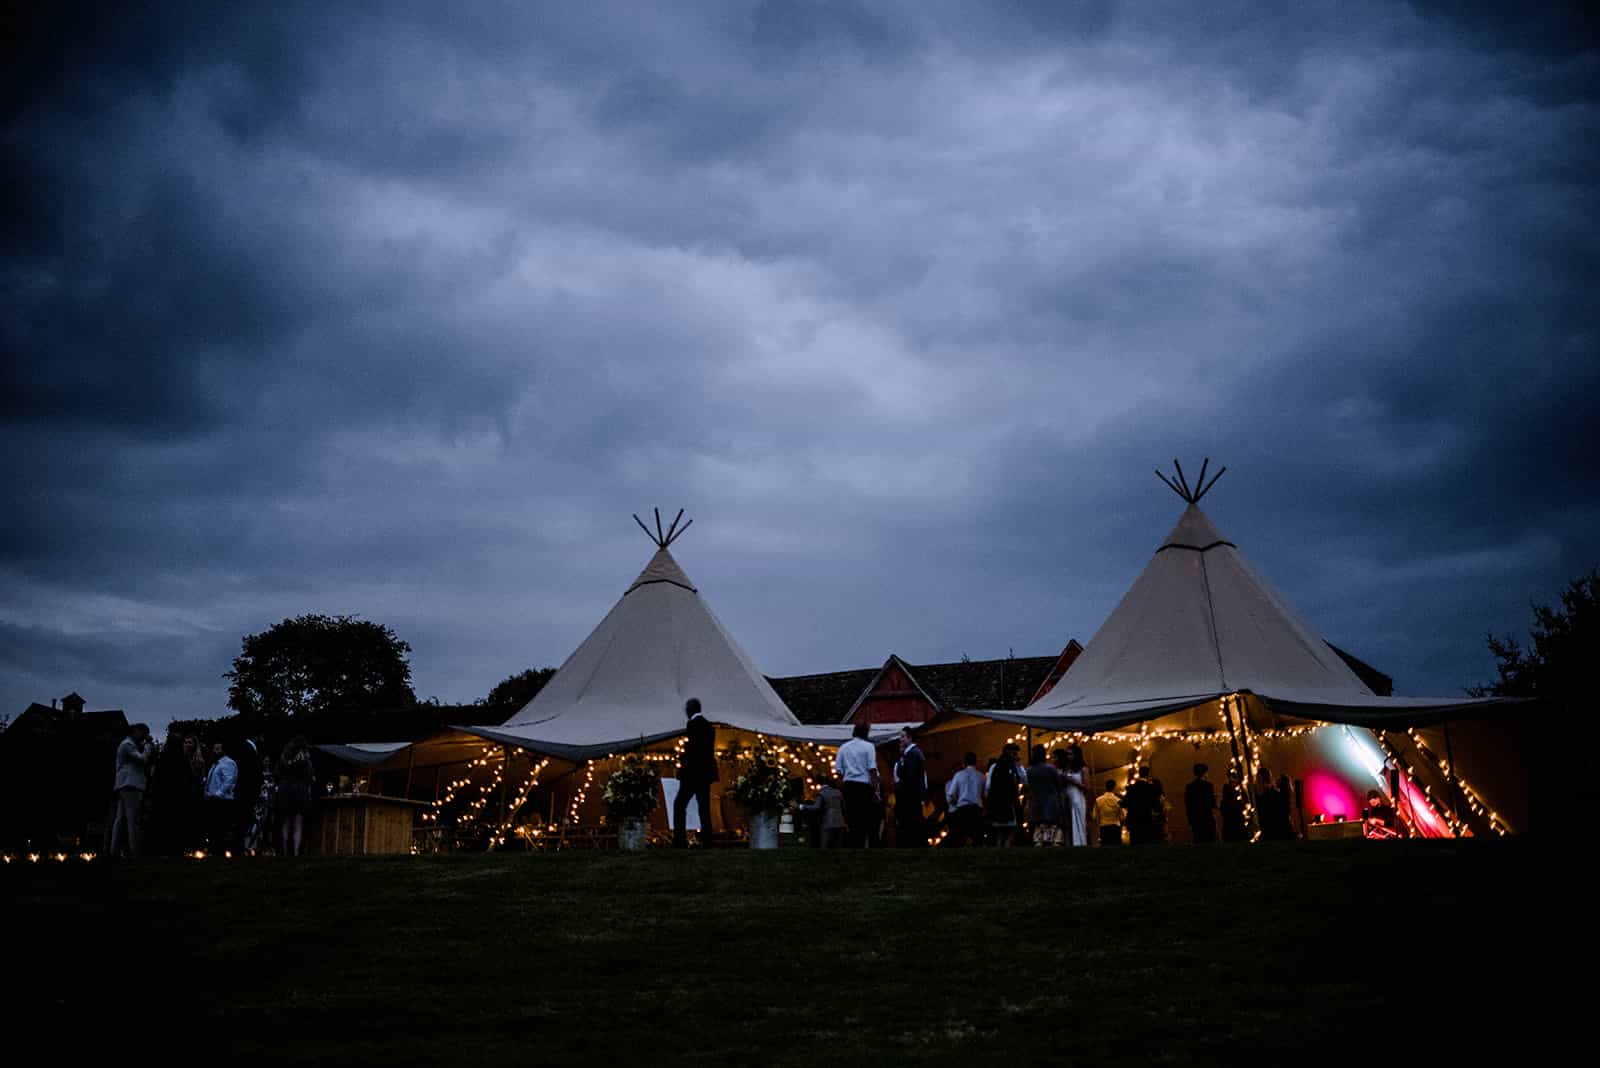 We are so excited to be featured in the telegraph's top 22 small wedding venues across the uk